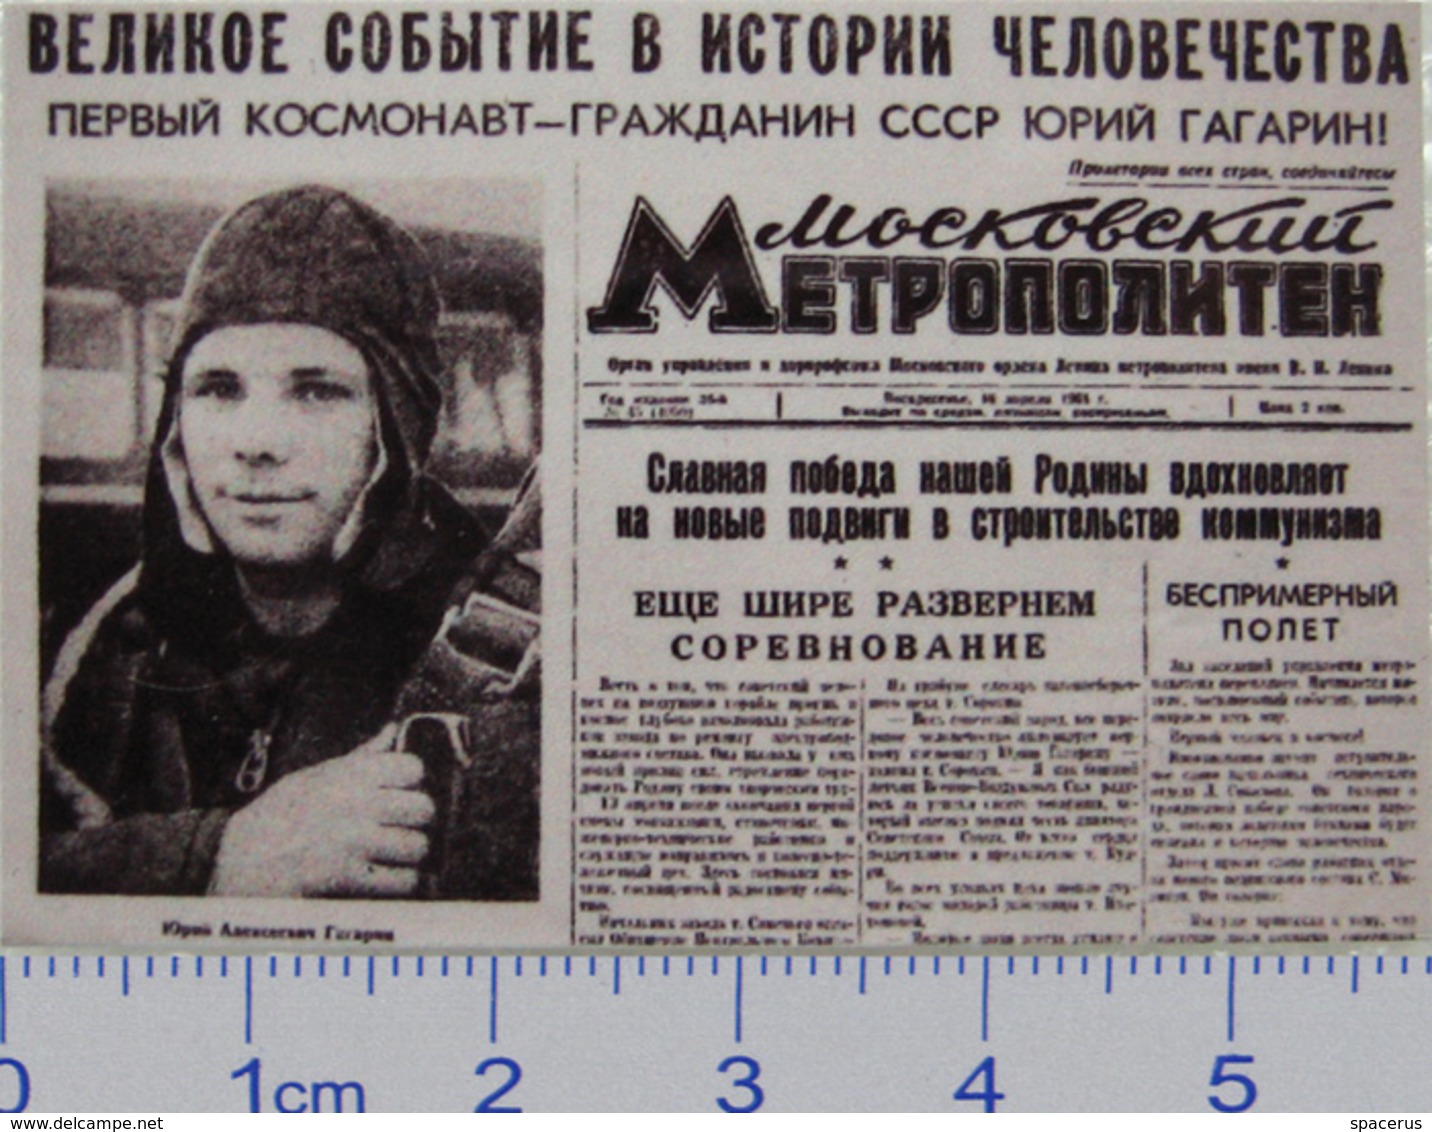 200 Space Soviet Russian Pin. Gagarin - First Man In Space. Newspaper "The Moscow Metro" - Space